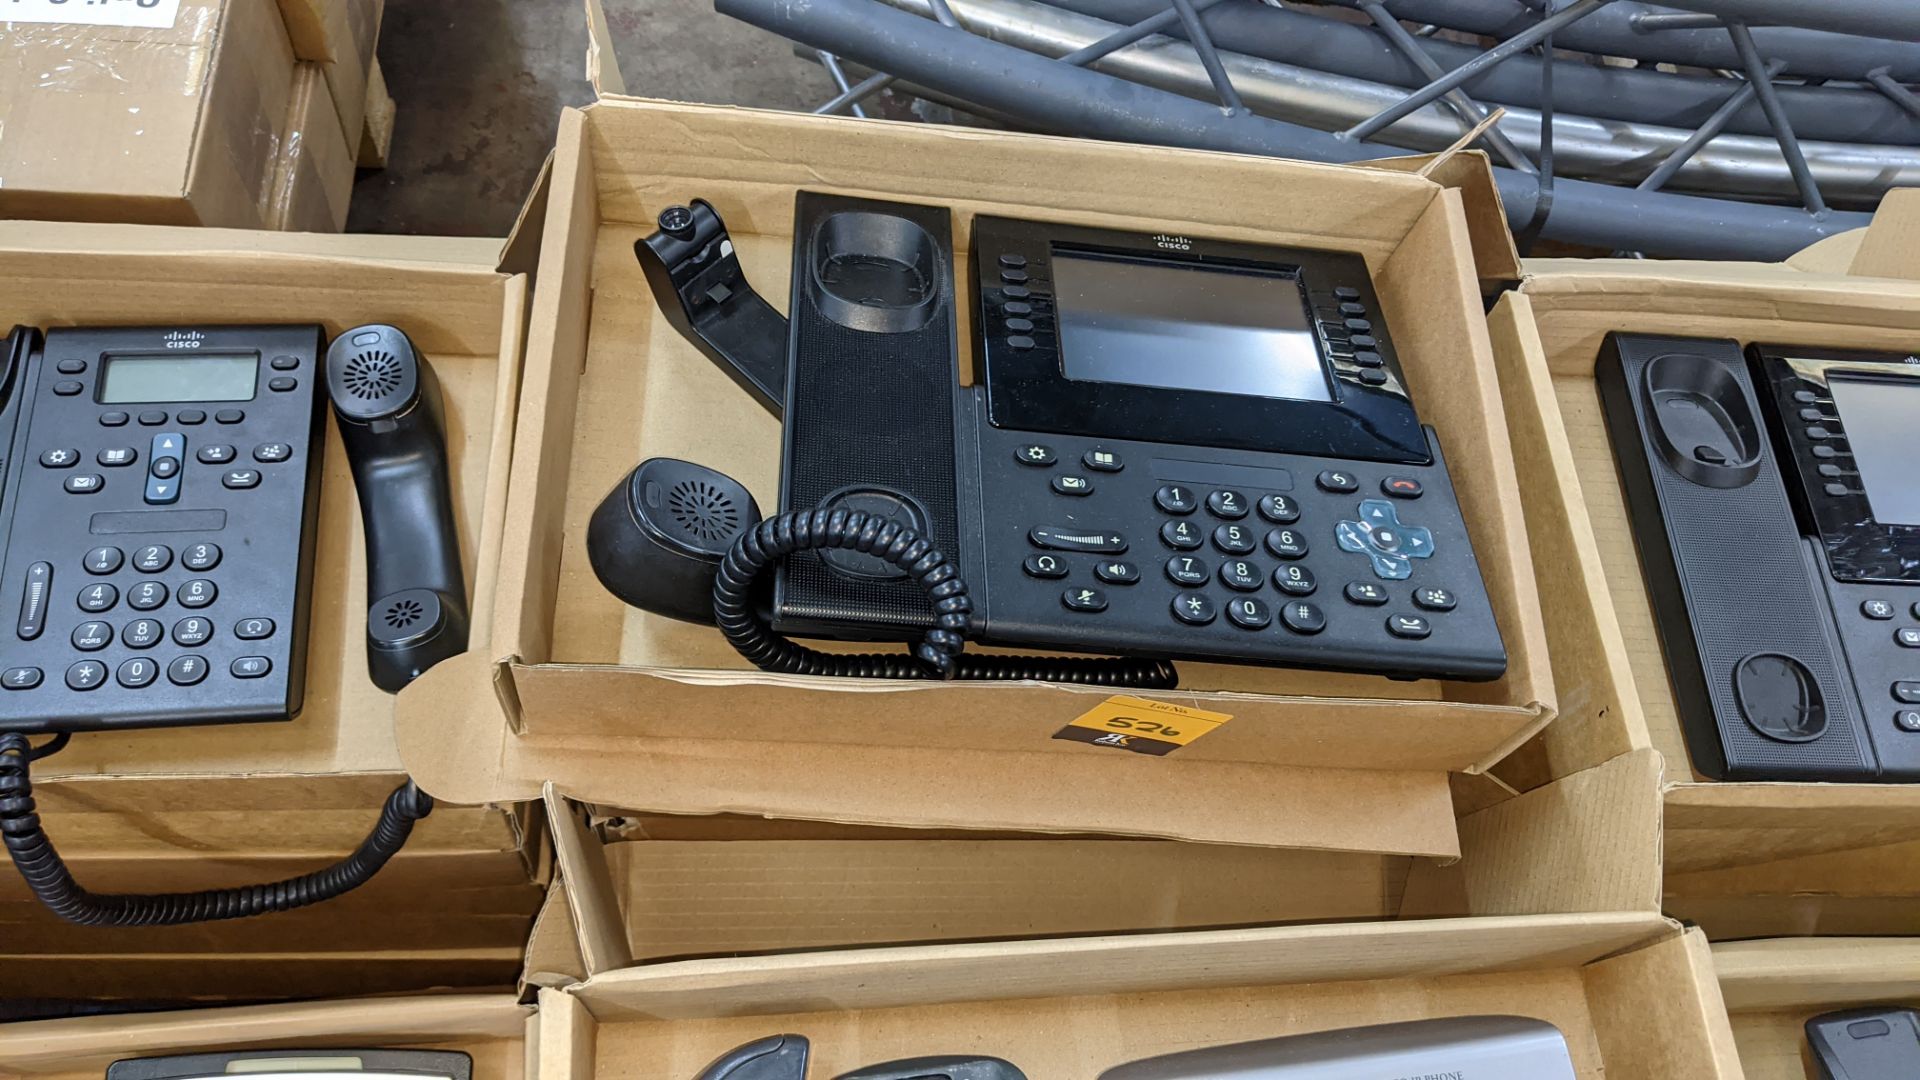 9 off Cisco telephone handsets model CP-9971